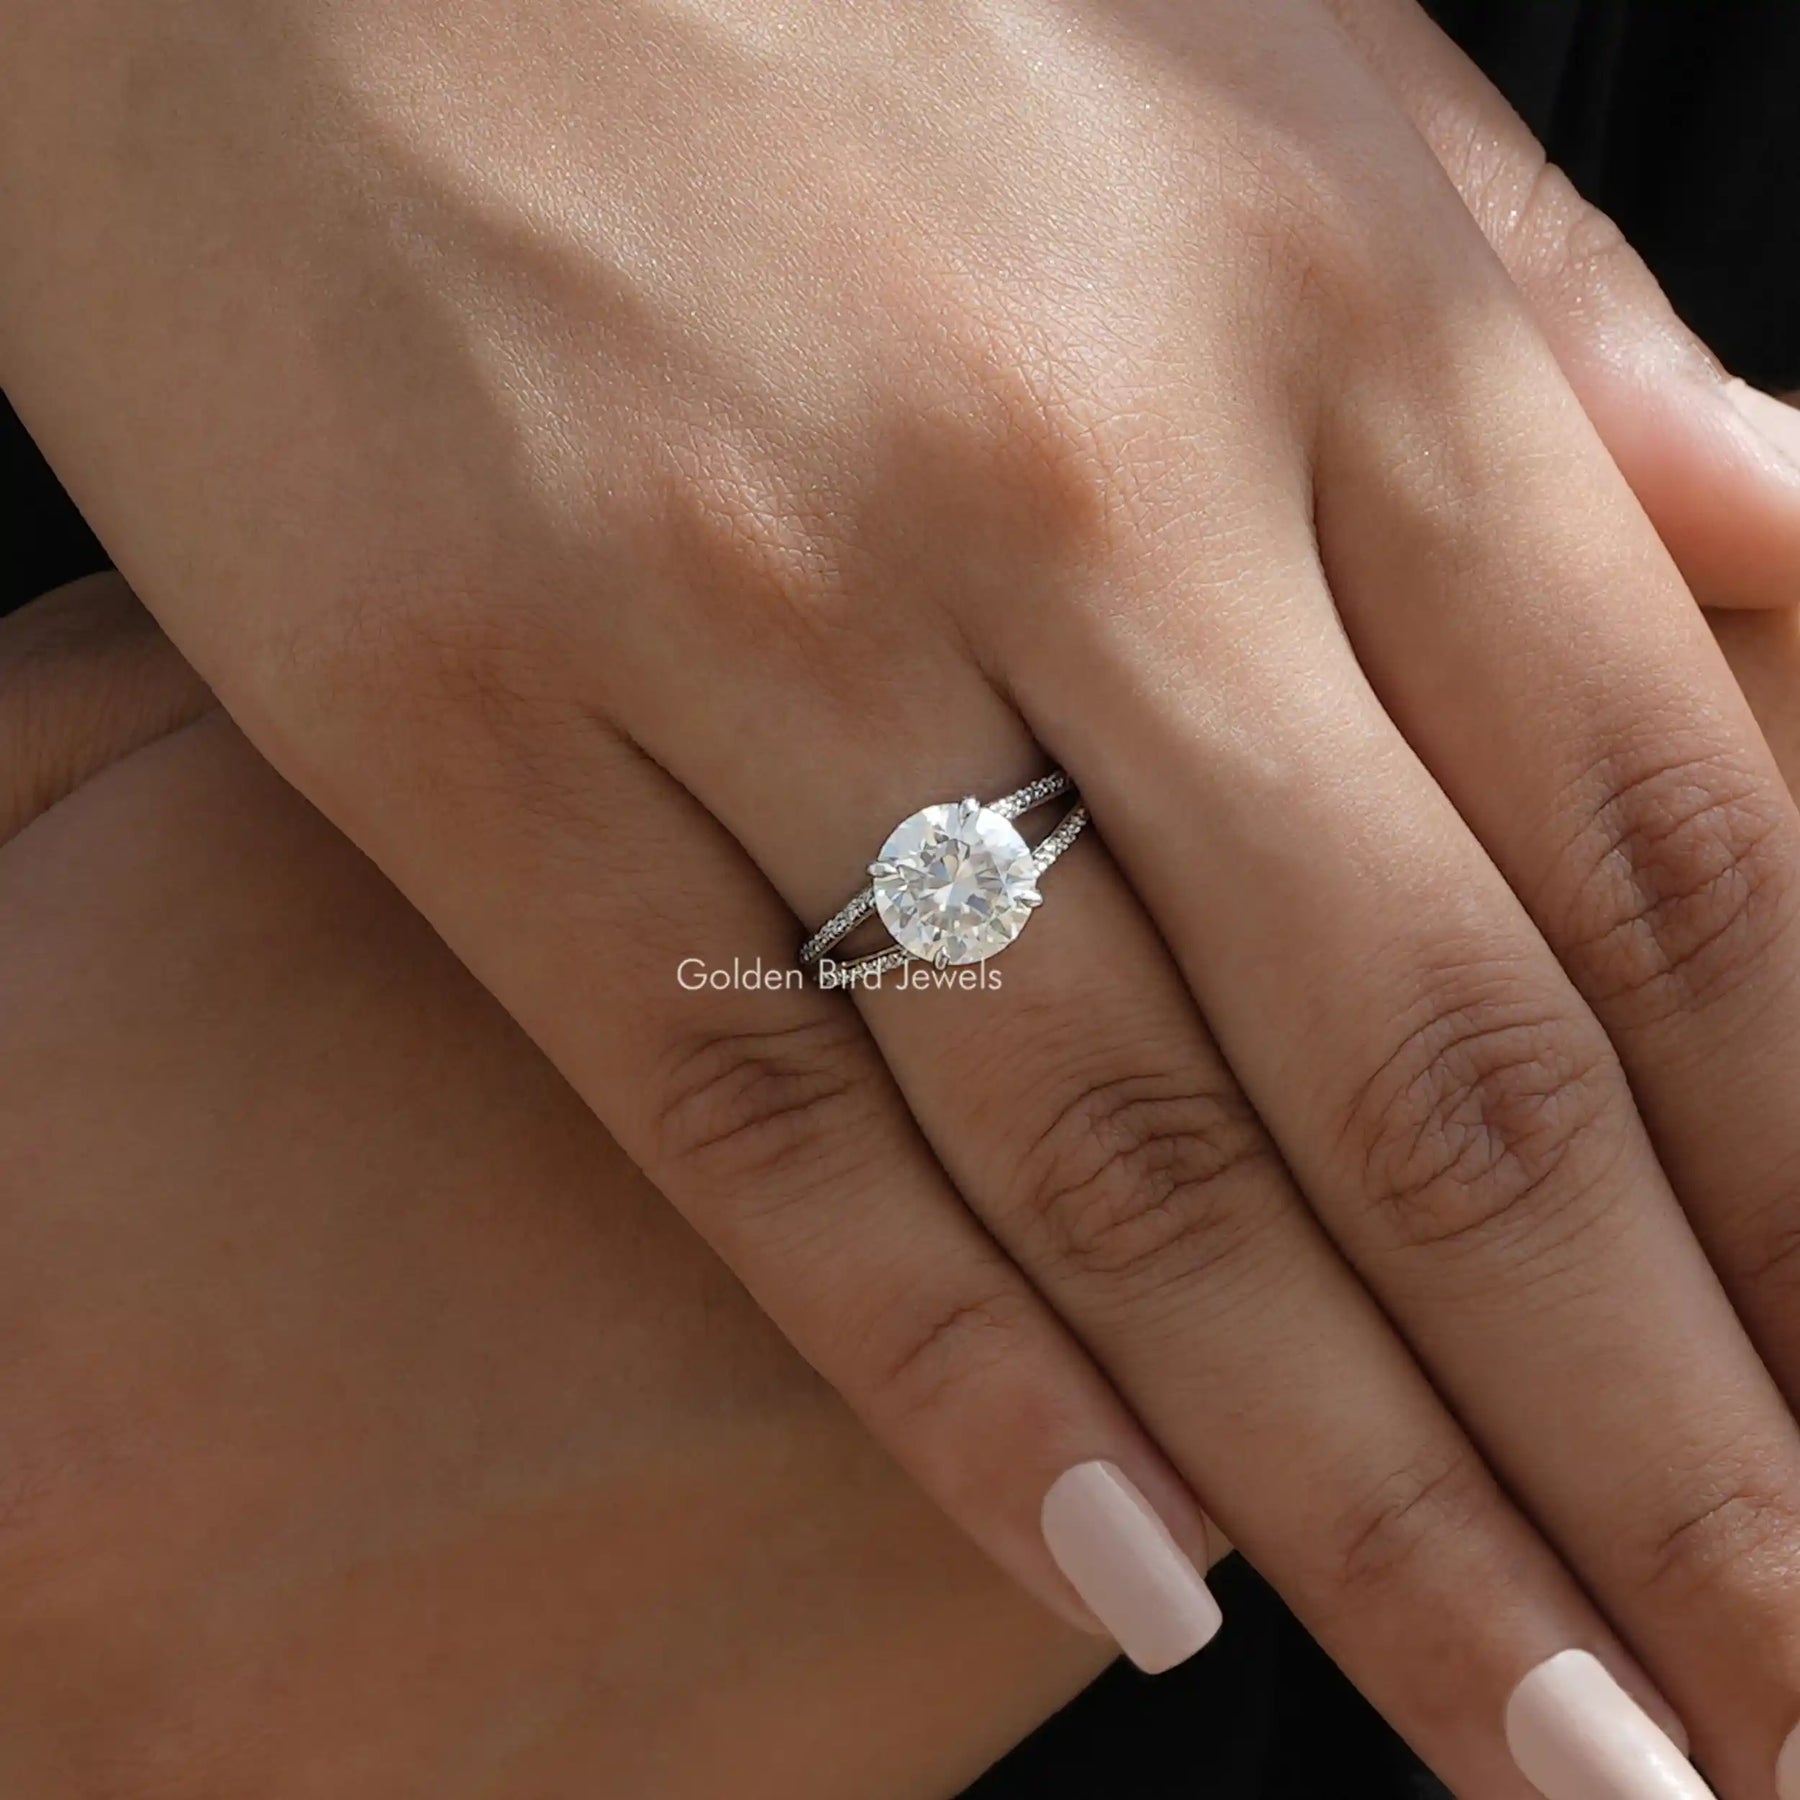 [This moissanite round cut ring crafted with split shank setting]-[Golden Bird Jewels]